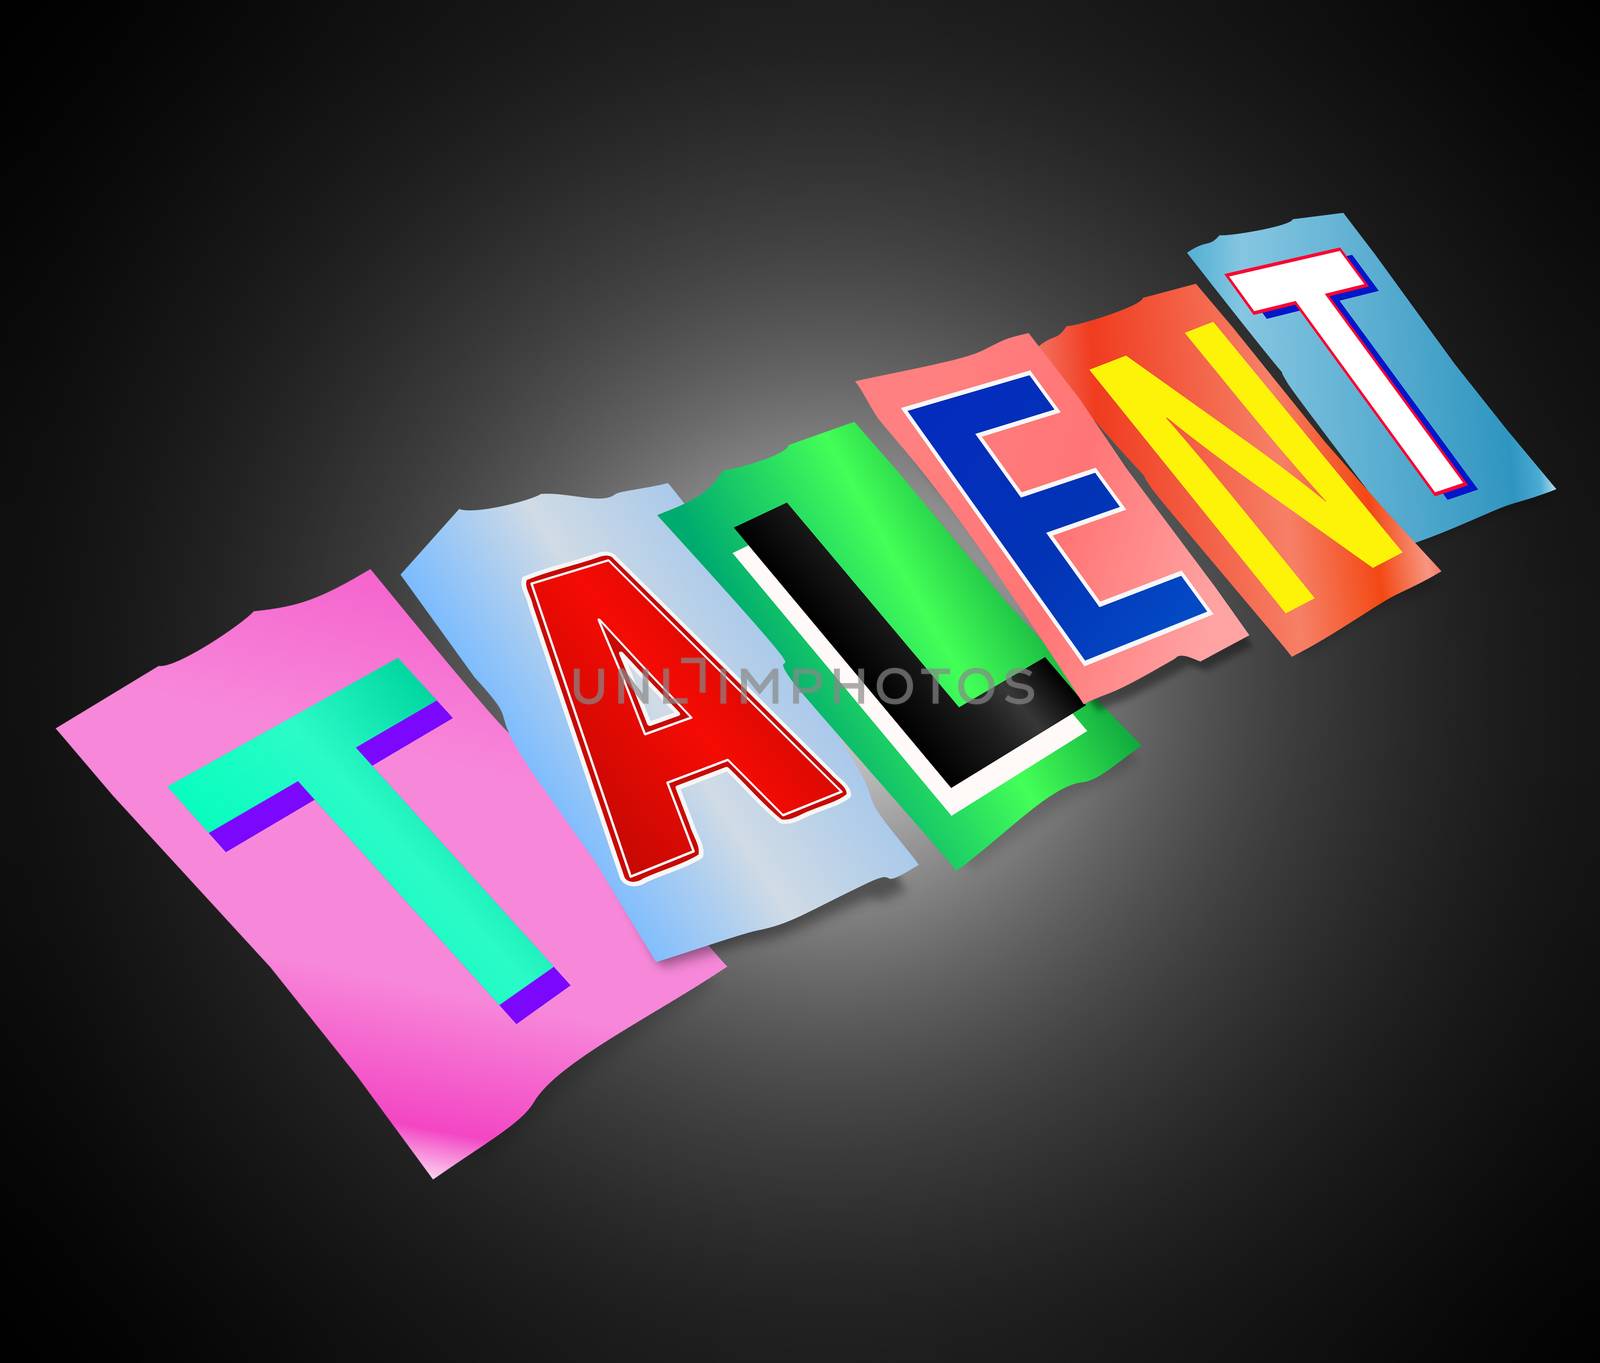 Illustration depicting a set of cut out printed letters arranged to form the word talent.